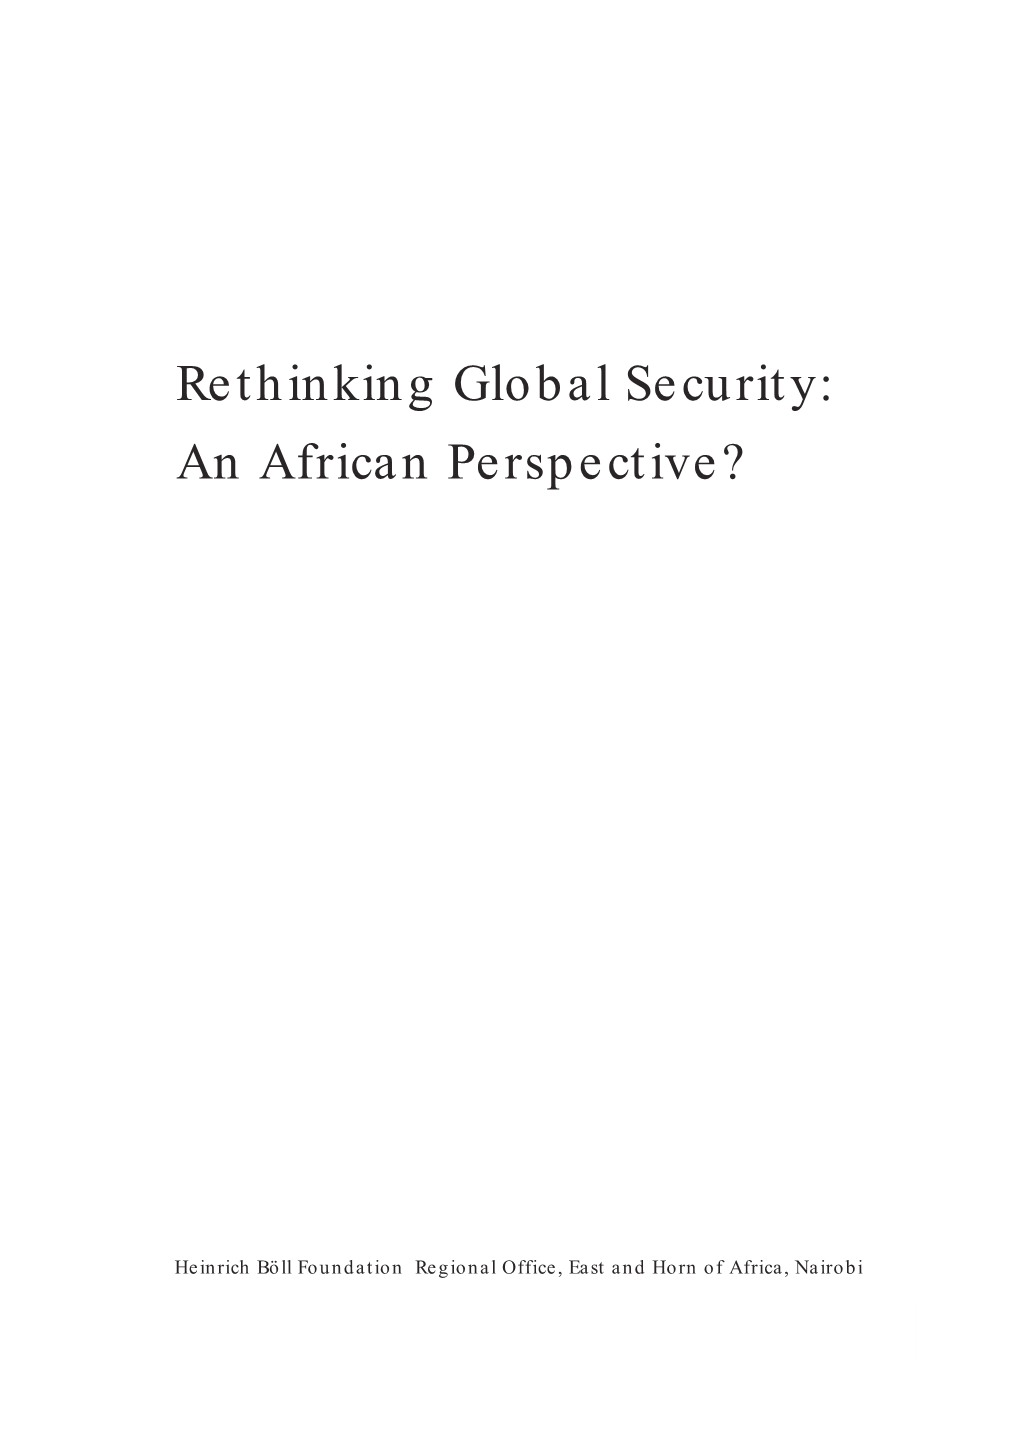 Rethinking Global Security: an African Perspective?